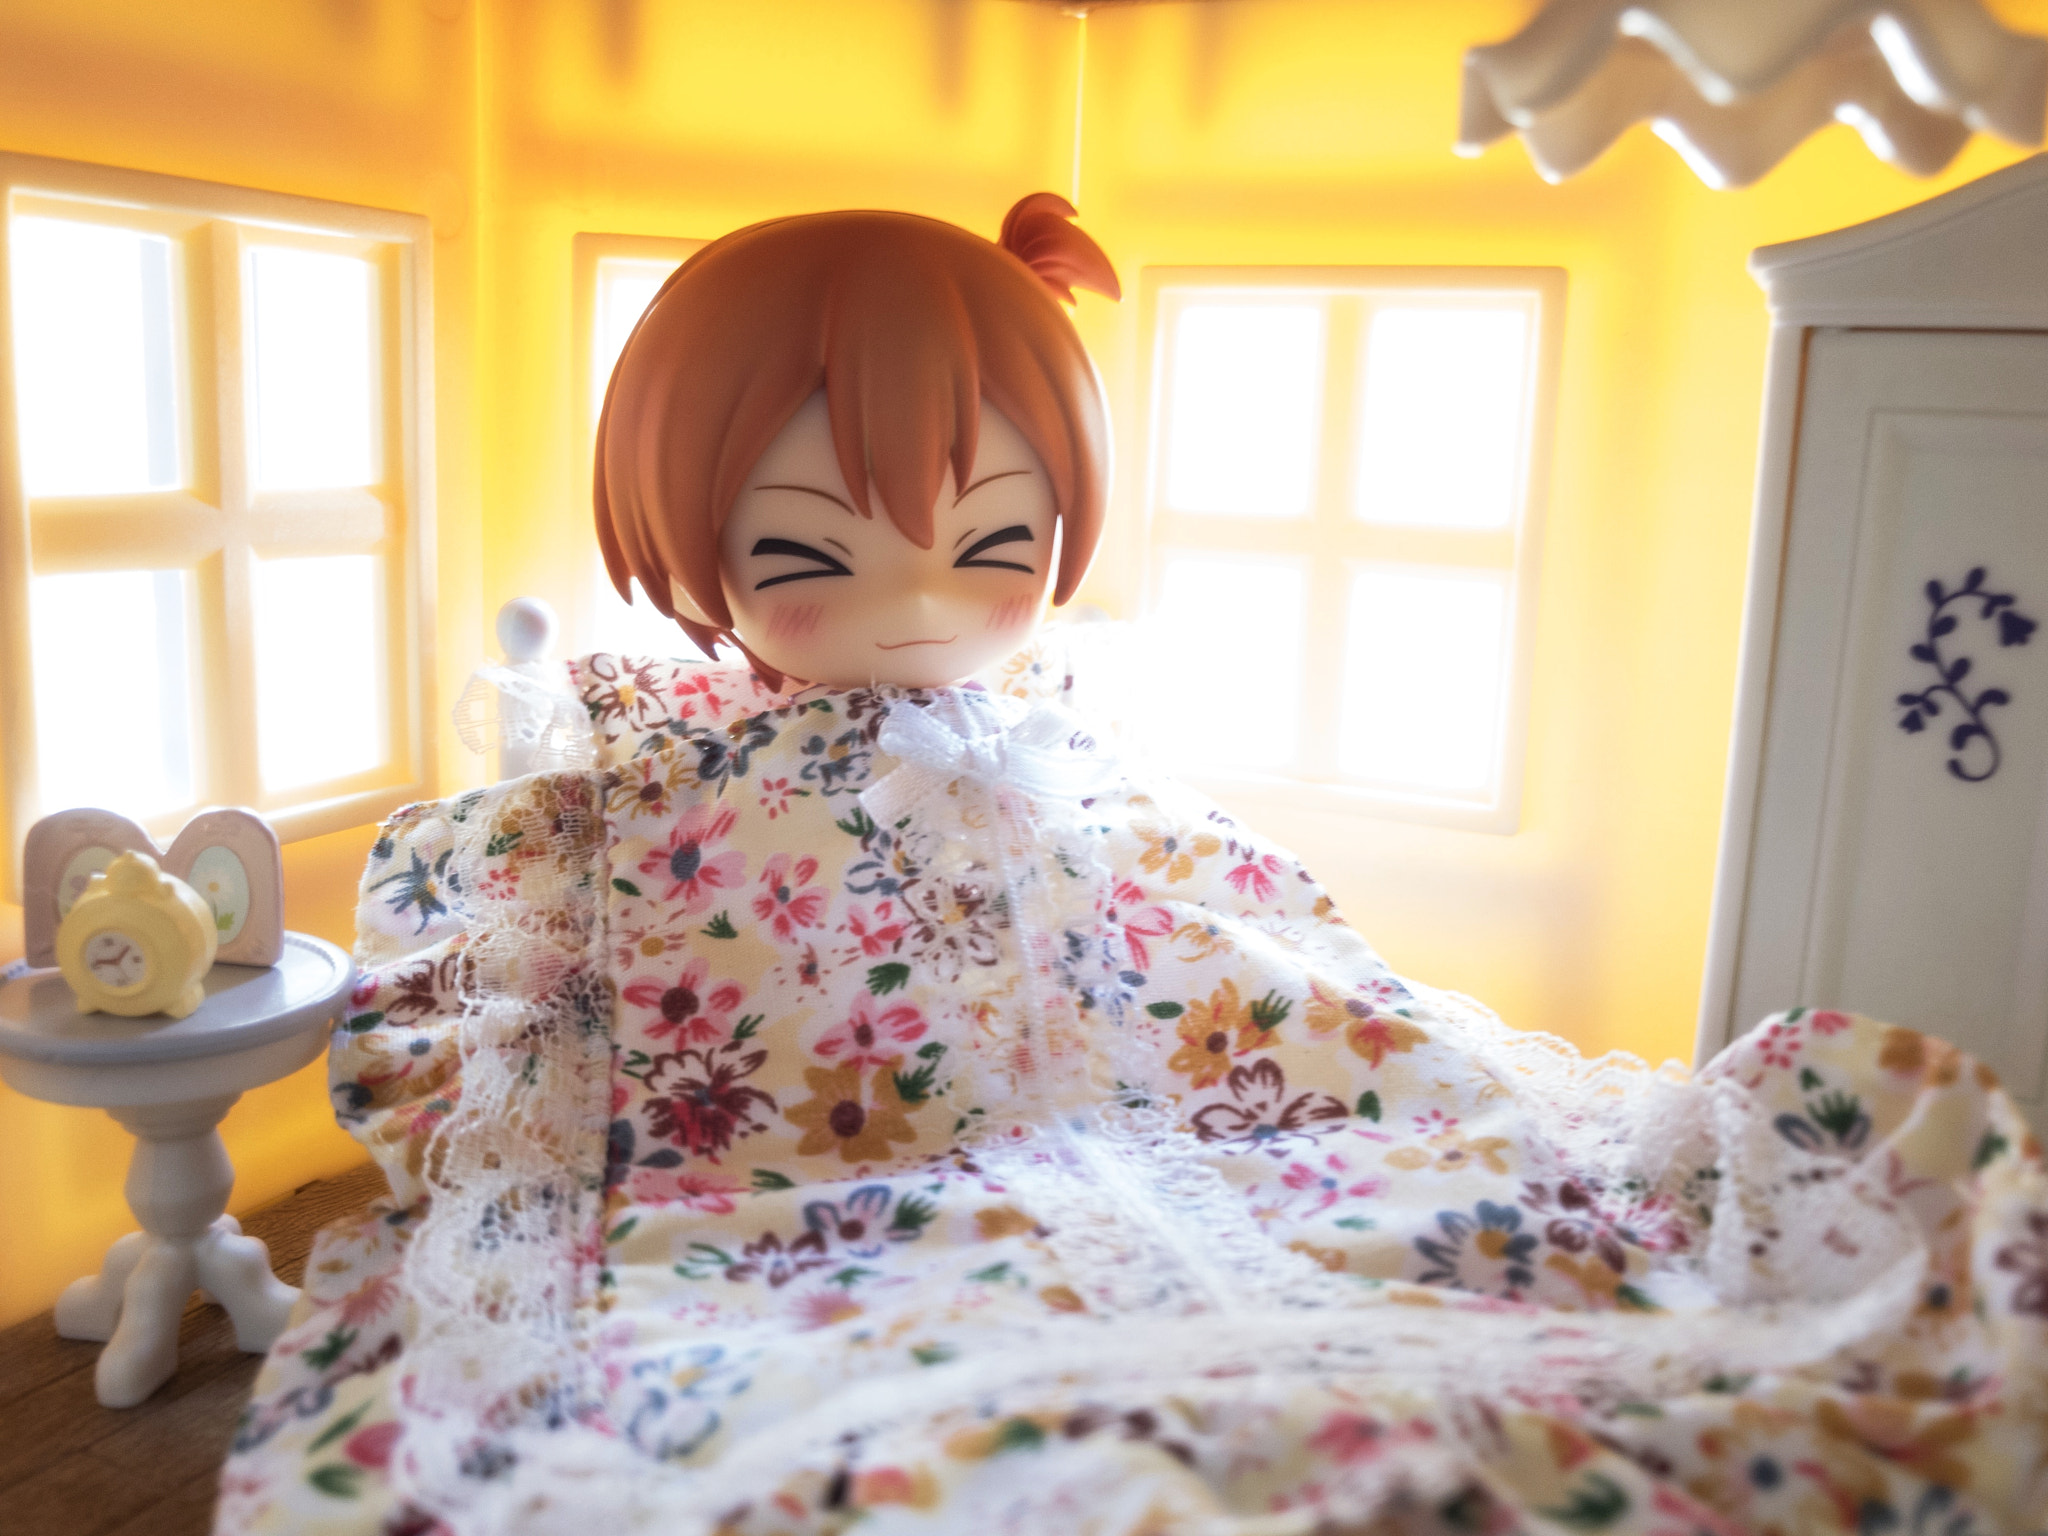 Apple iPhone 7 Plus + iPhone 7 Plus back camera 3.99mm f/1.8 sample photo. Rin hoshizora getting cozy on a day off. photography